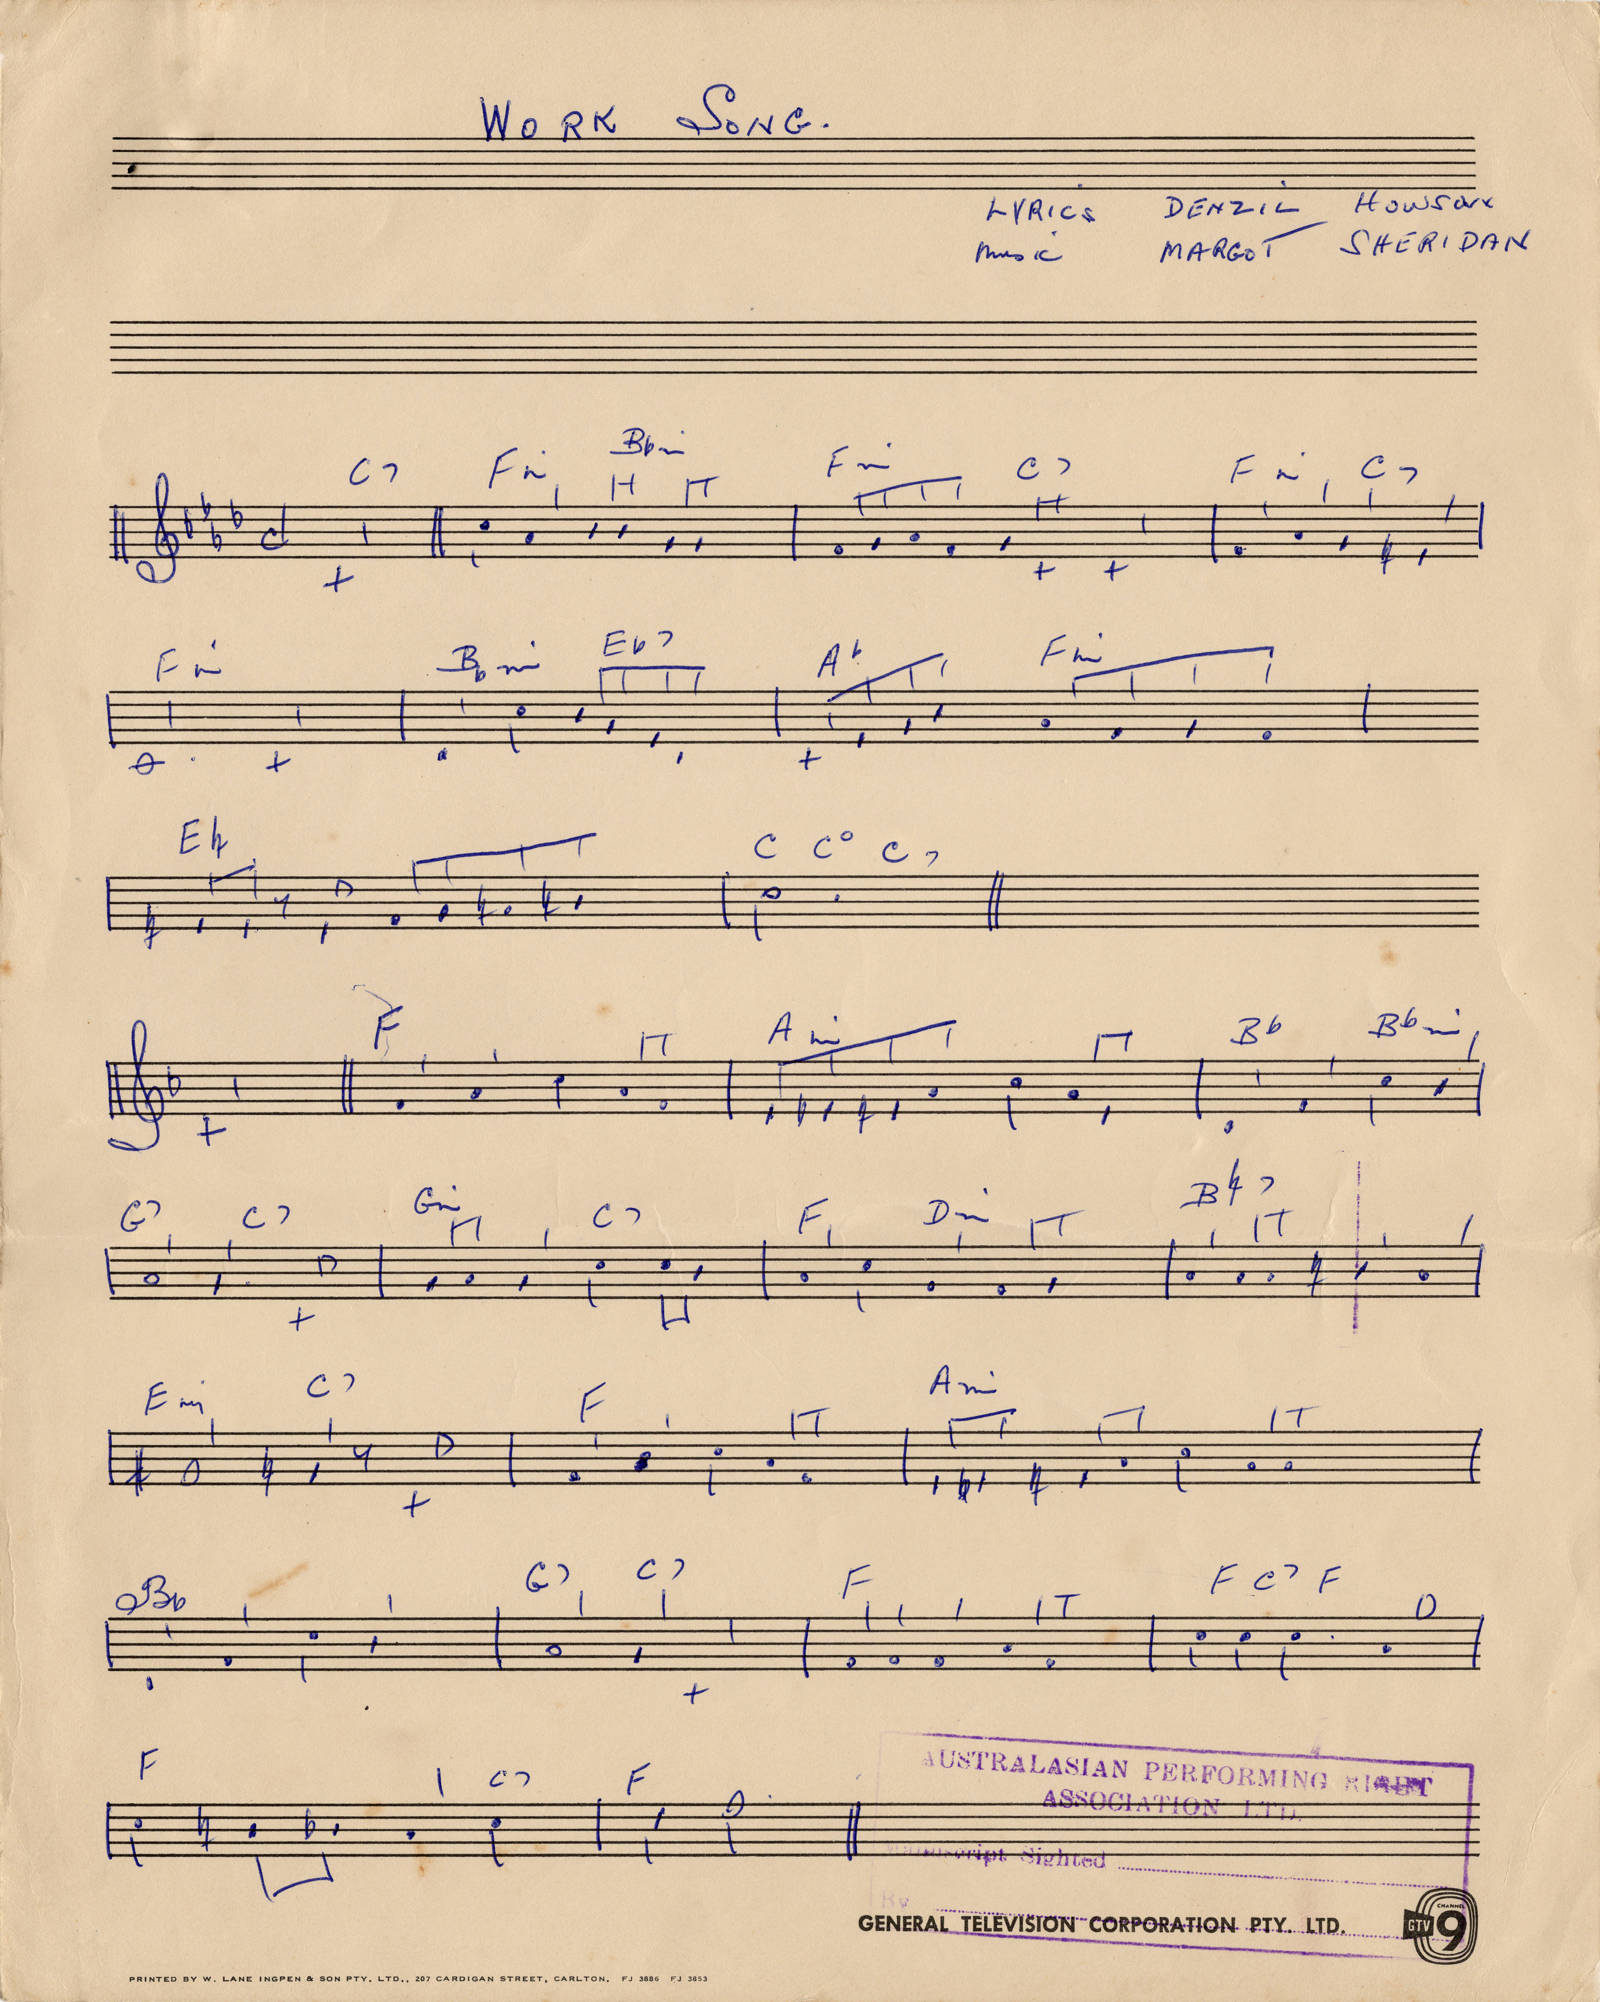 music score of “Work Song” song